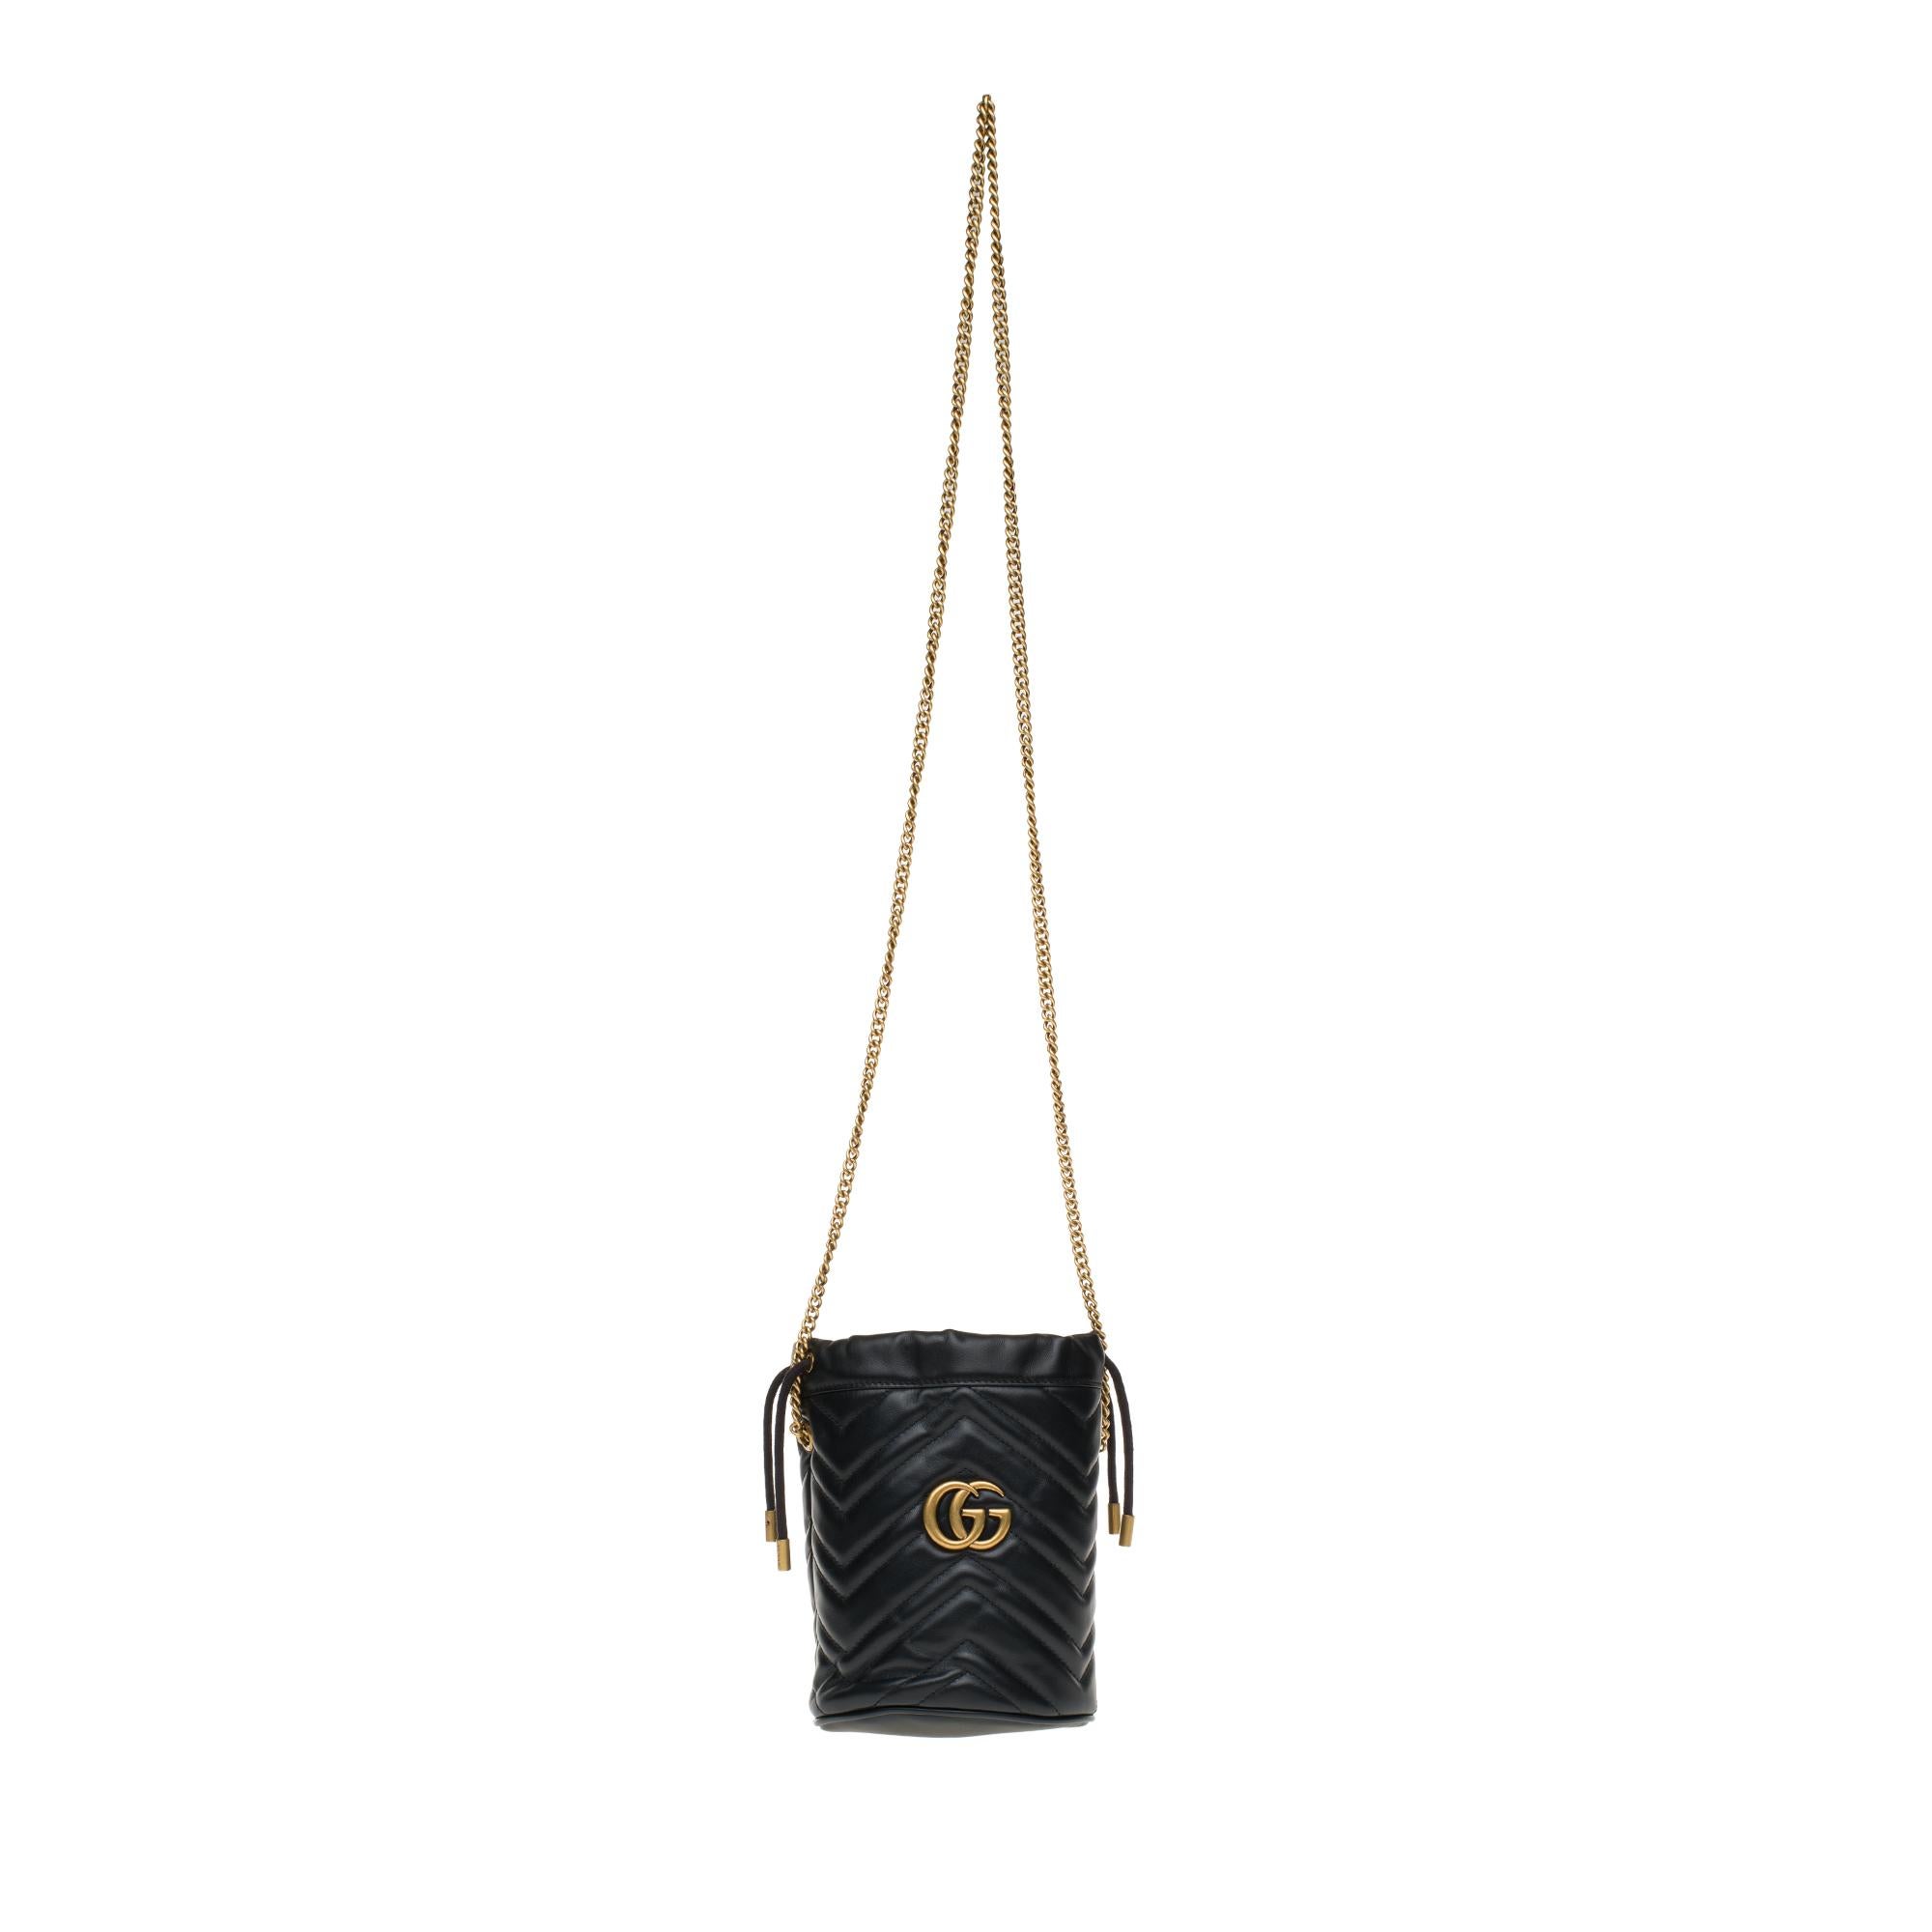 Gucci mini bucket bag GG Marmont made in black quilted leather with chevrons. Inspired by a model from the archives of the 70’s, a flagship period for the House, the Double G adorns the front of this accessory. With its chain shoulder strap and